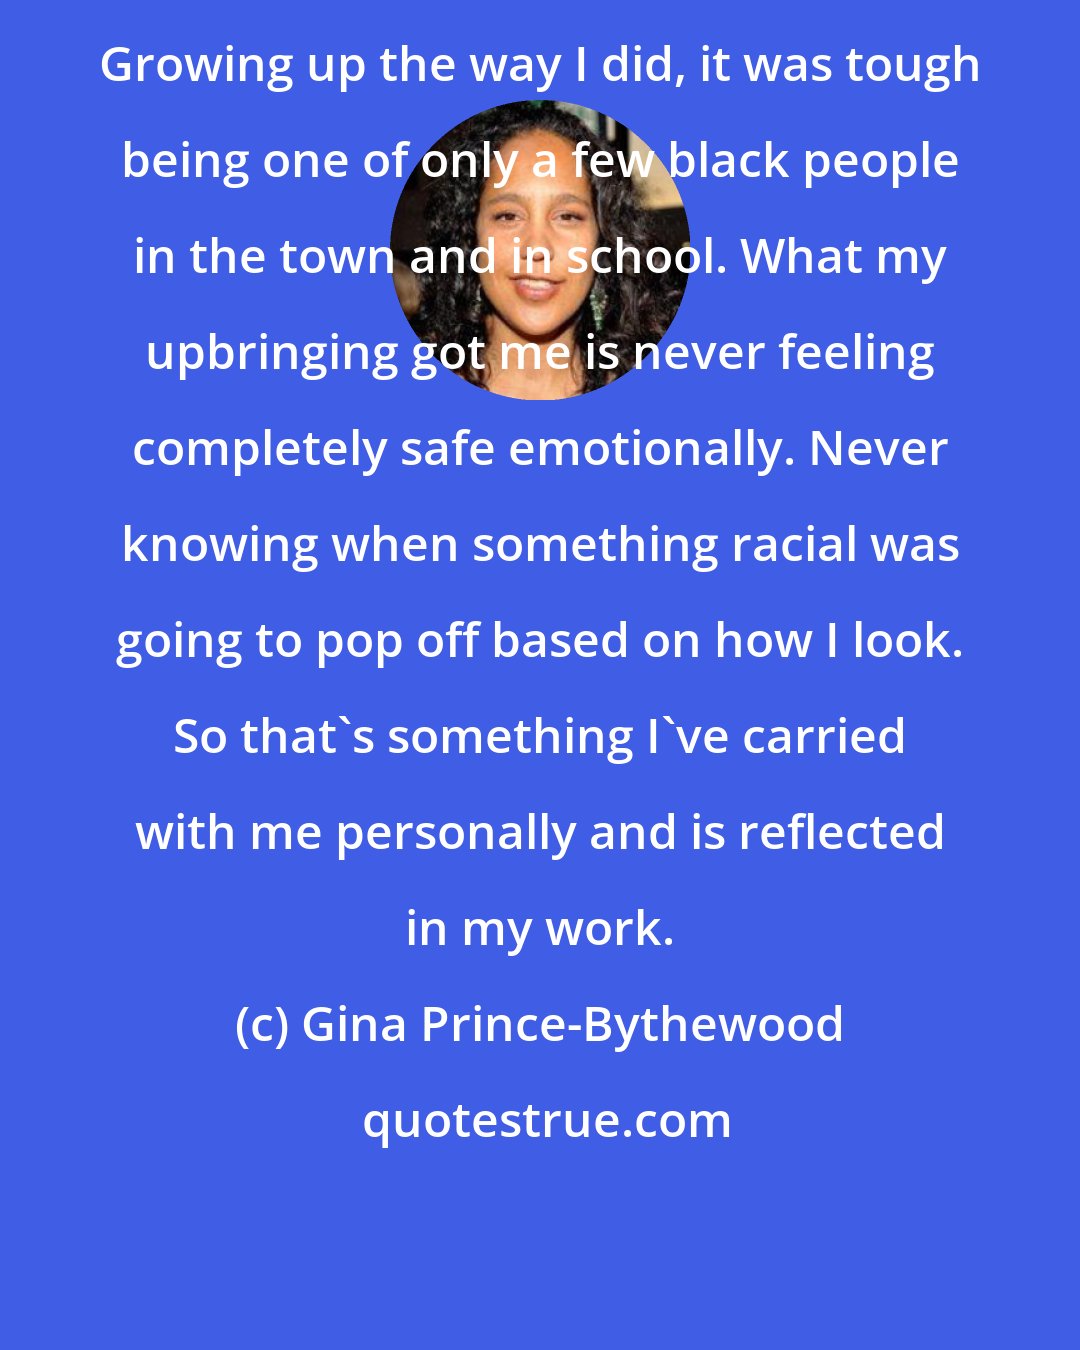 Gina Prince-Bythewood: Growing up the way I did, it was tough being one of only a few black people in the town and in school. What my upbringing got me is never feeling completely safe emotionally. Never knowing when something racial was going to pop off based on how I look. So that's something I've carried with me personally and is reflected in my work.